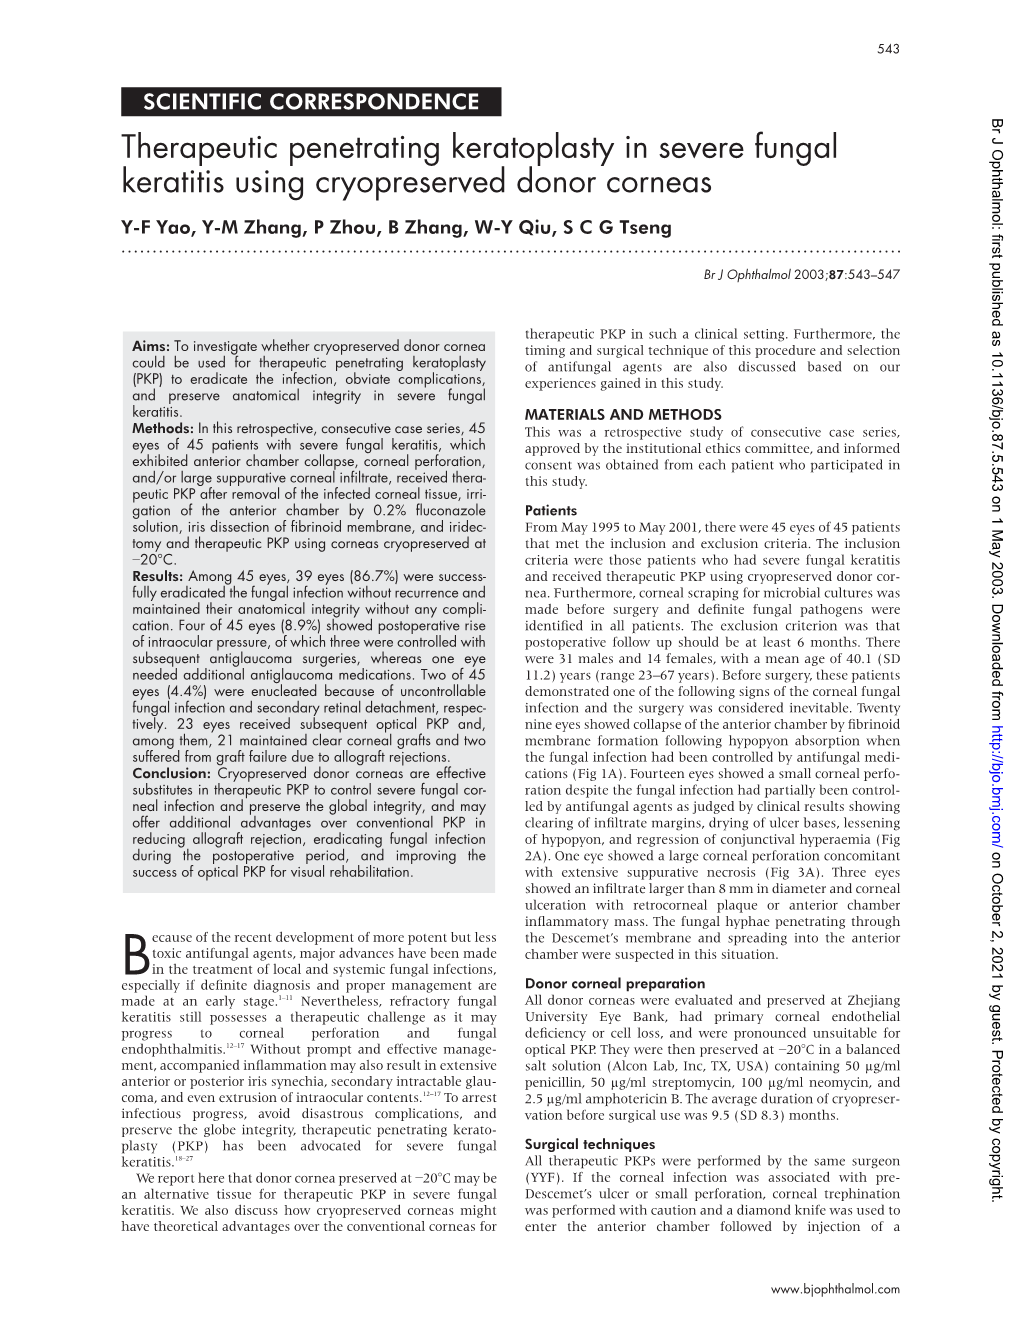 Therapeutic Penetrating Keratoplasty in Severe Fungal Keratitis Using Cryopreserved Donor Corneas Y-F Yao, Y-M Zhang, P Zhou, B Zhang, W-Y Qiu,Scgtseng